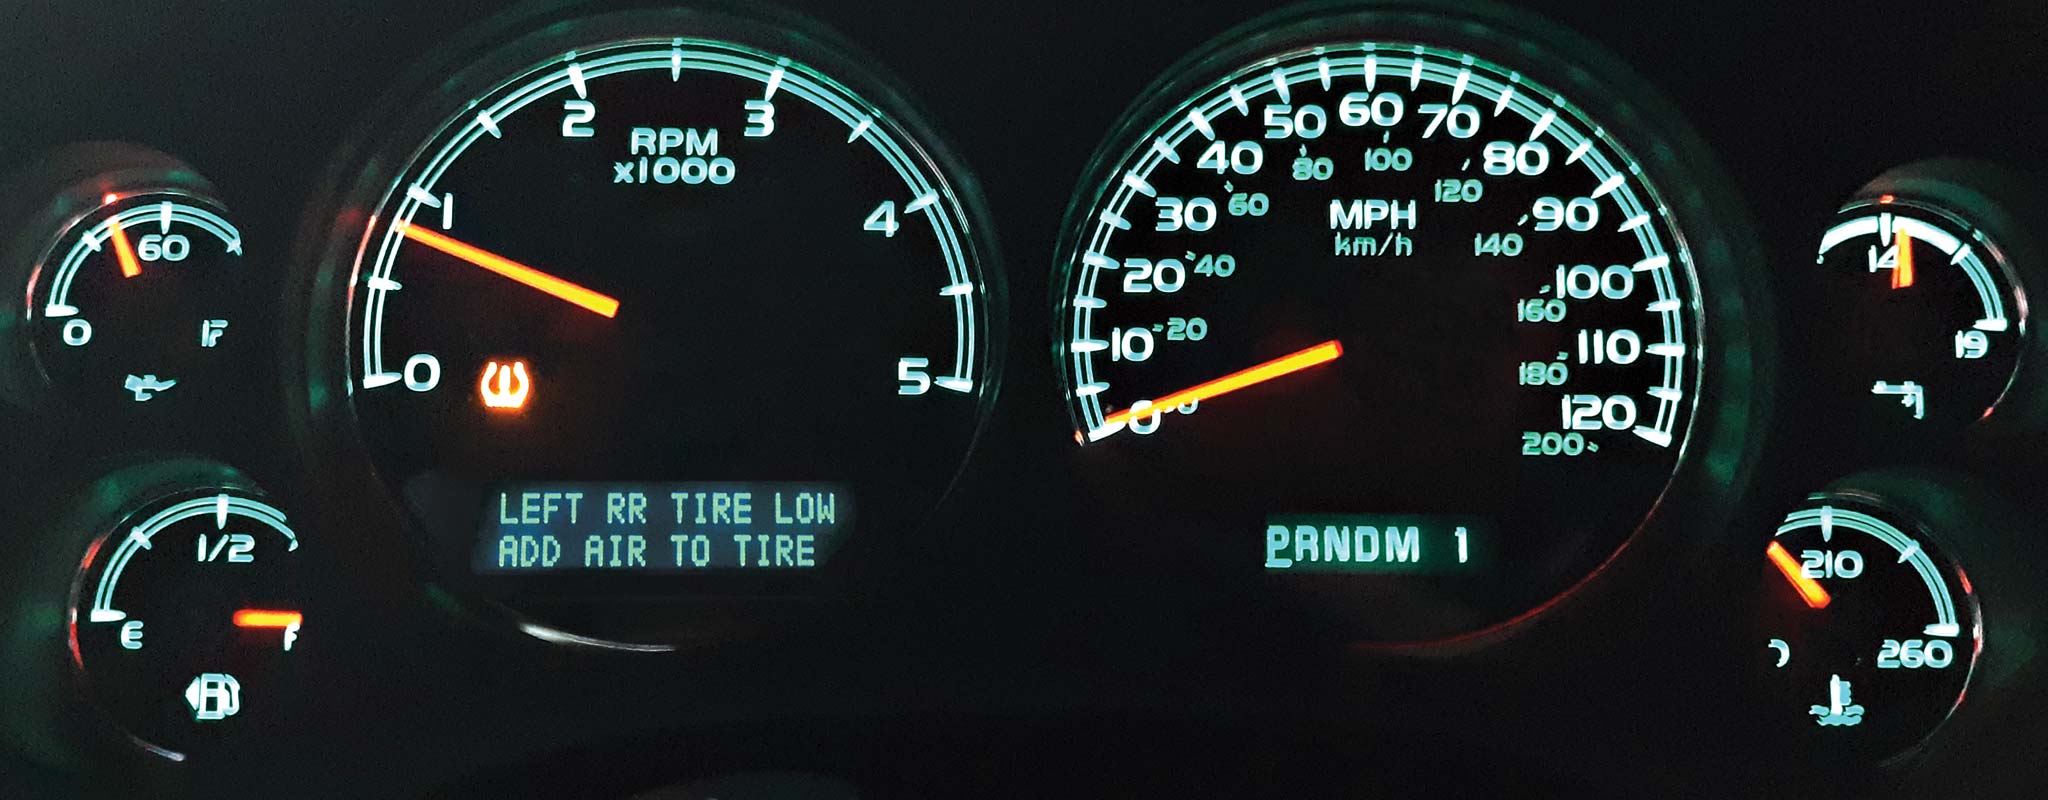 An illuminated dashboard with TPMS lights.